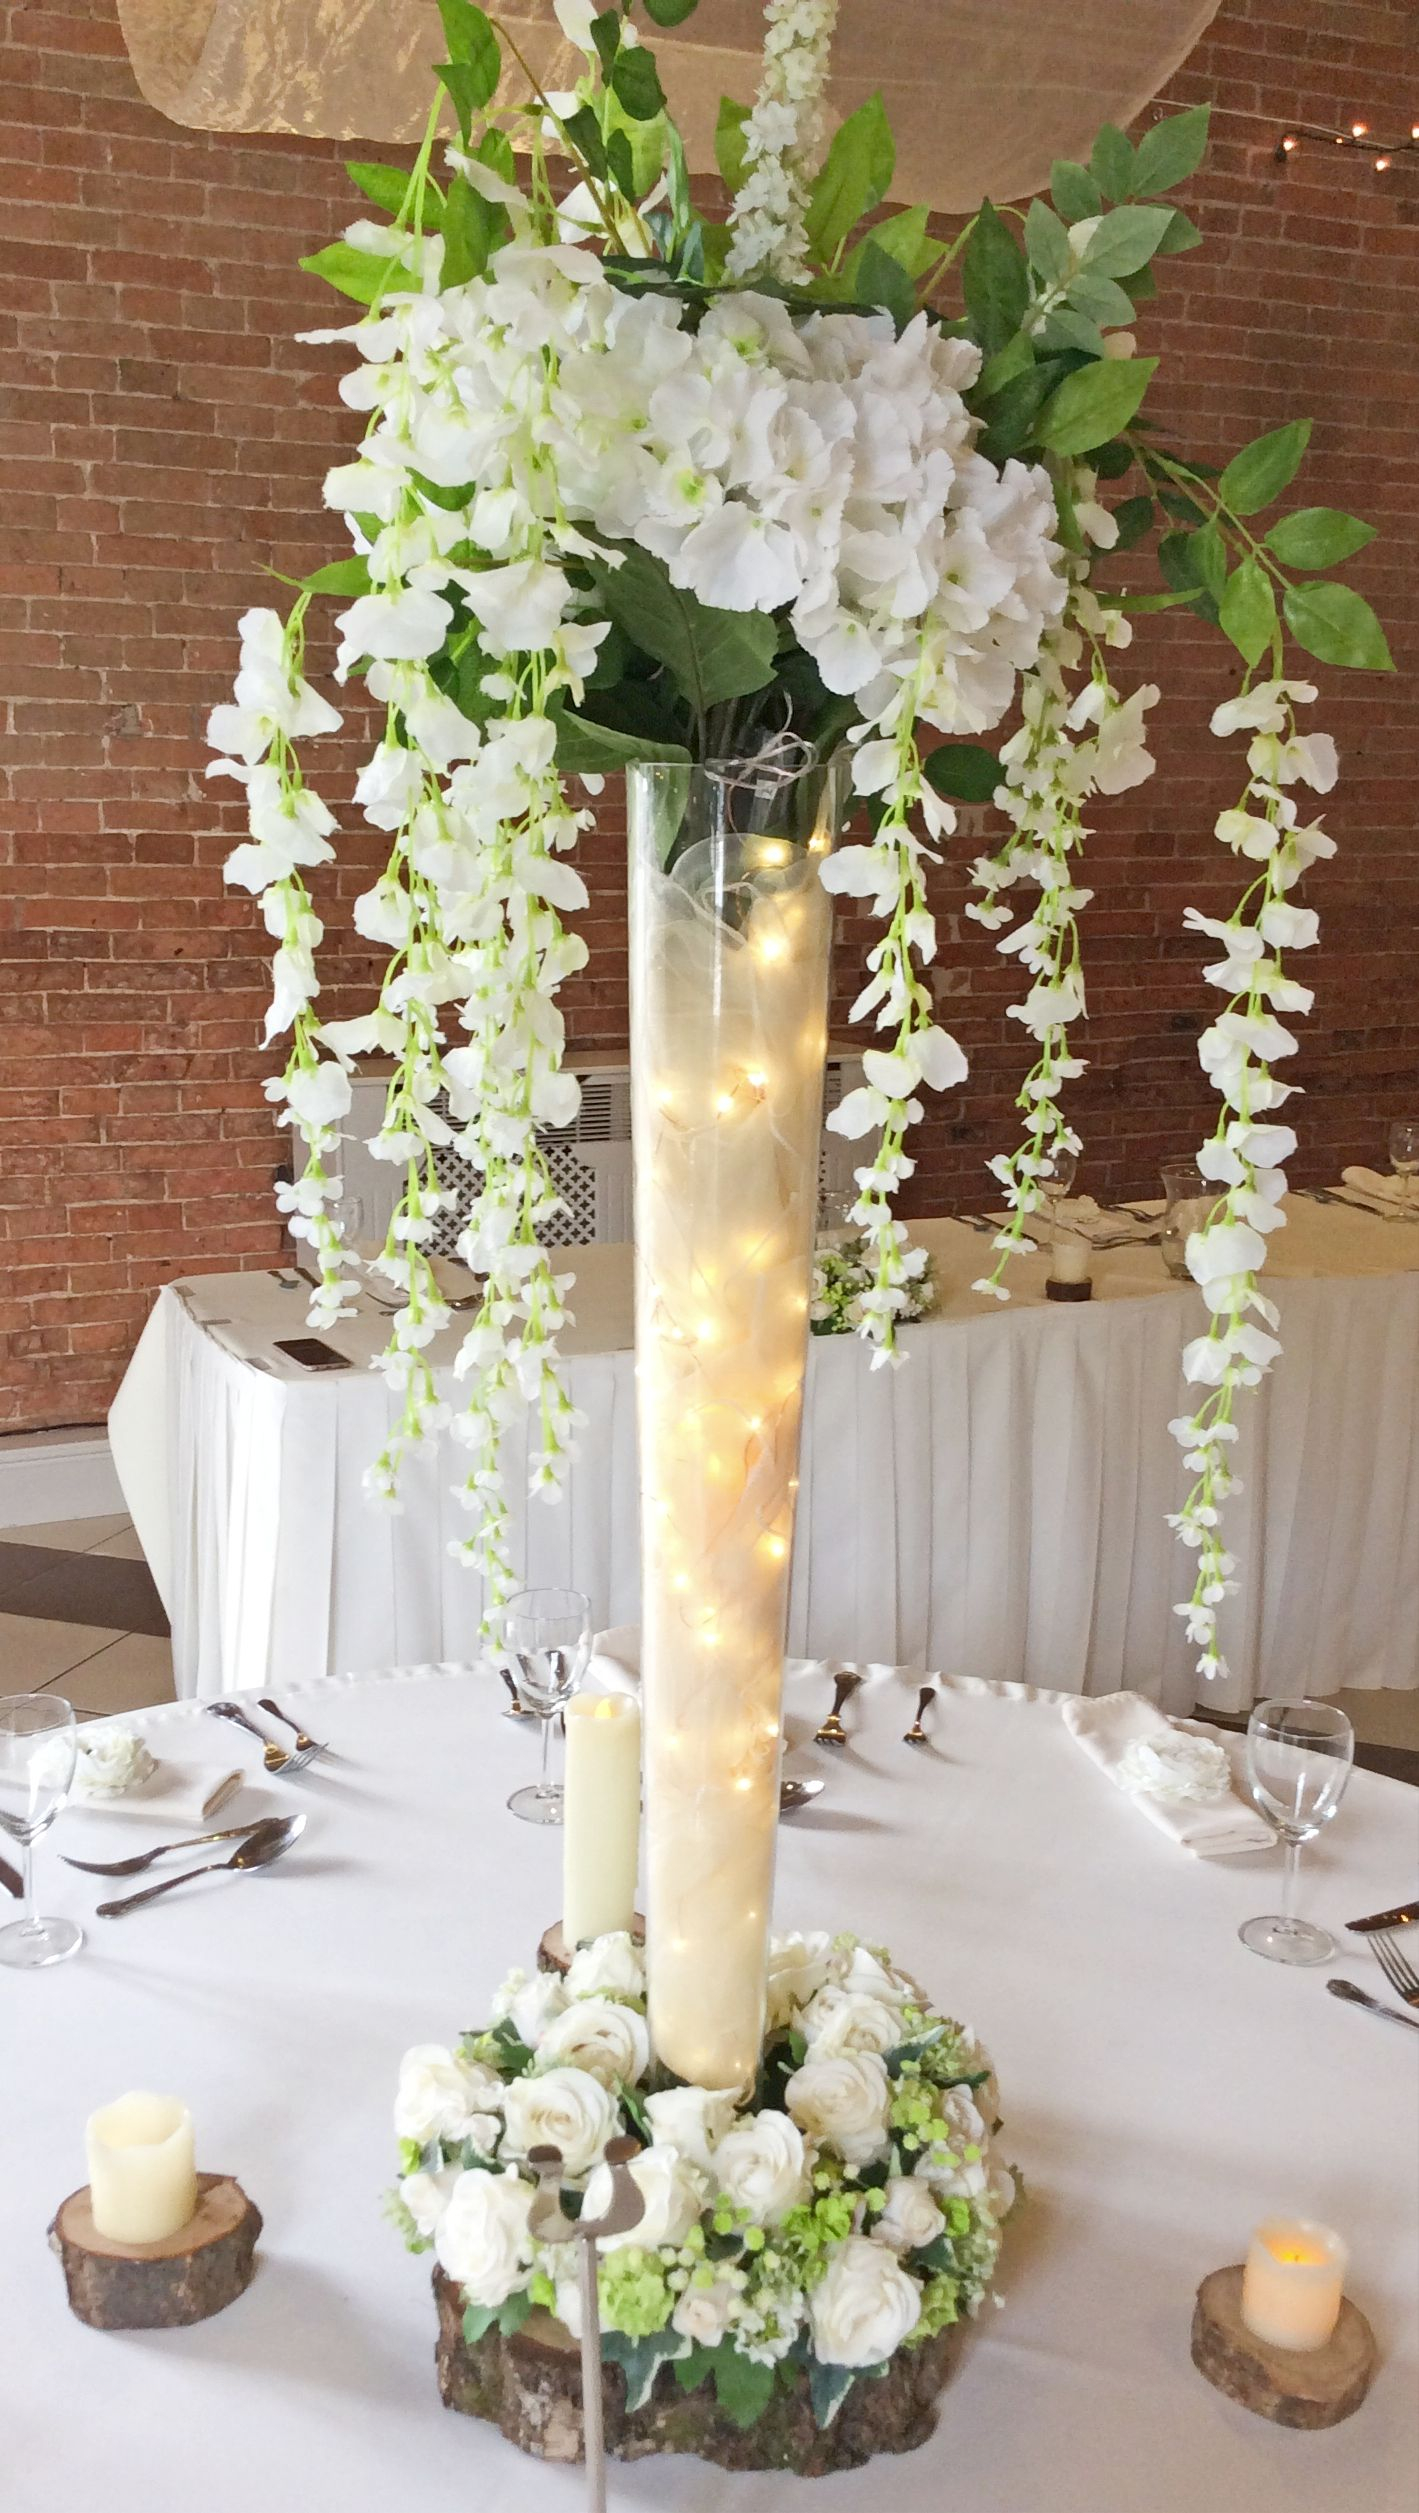 Tall Vase With Wisteria And Lights Wedding Floral within dimensions 1419 X 2513